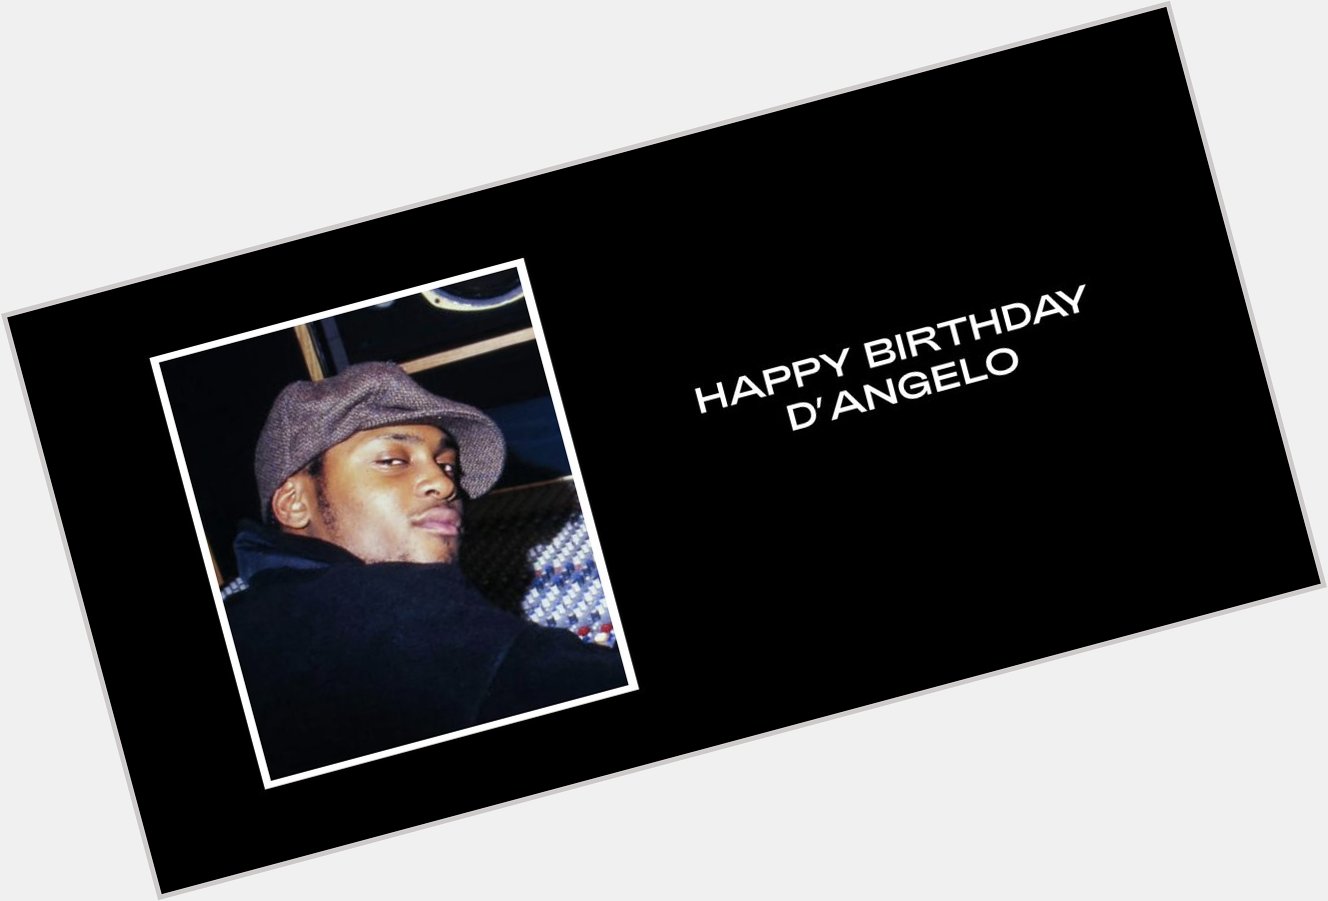 Beyoncé wishes D\Angelo a happy 48th birthday. 